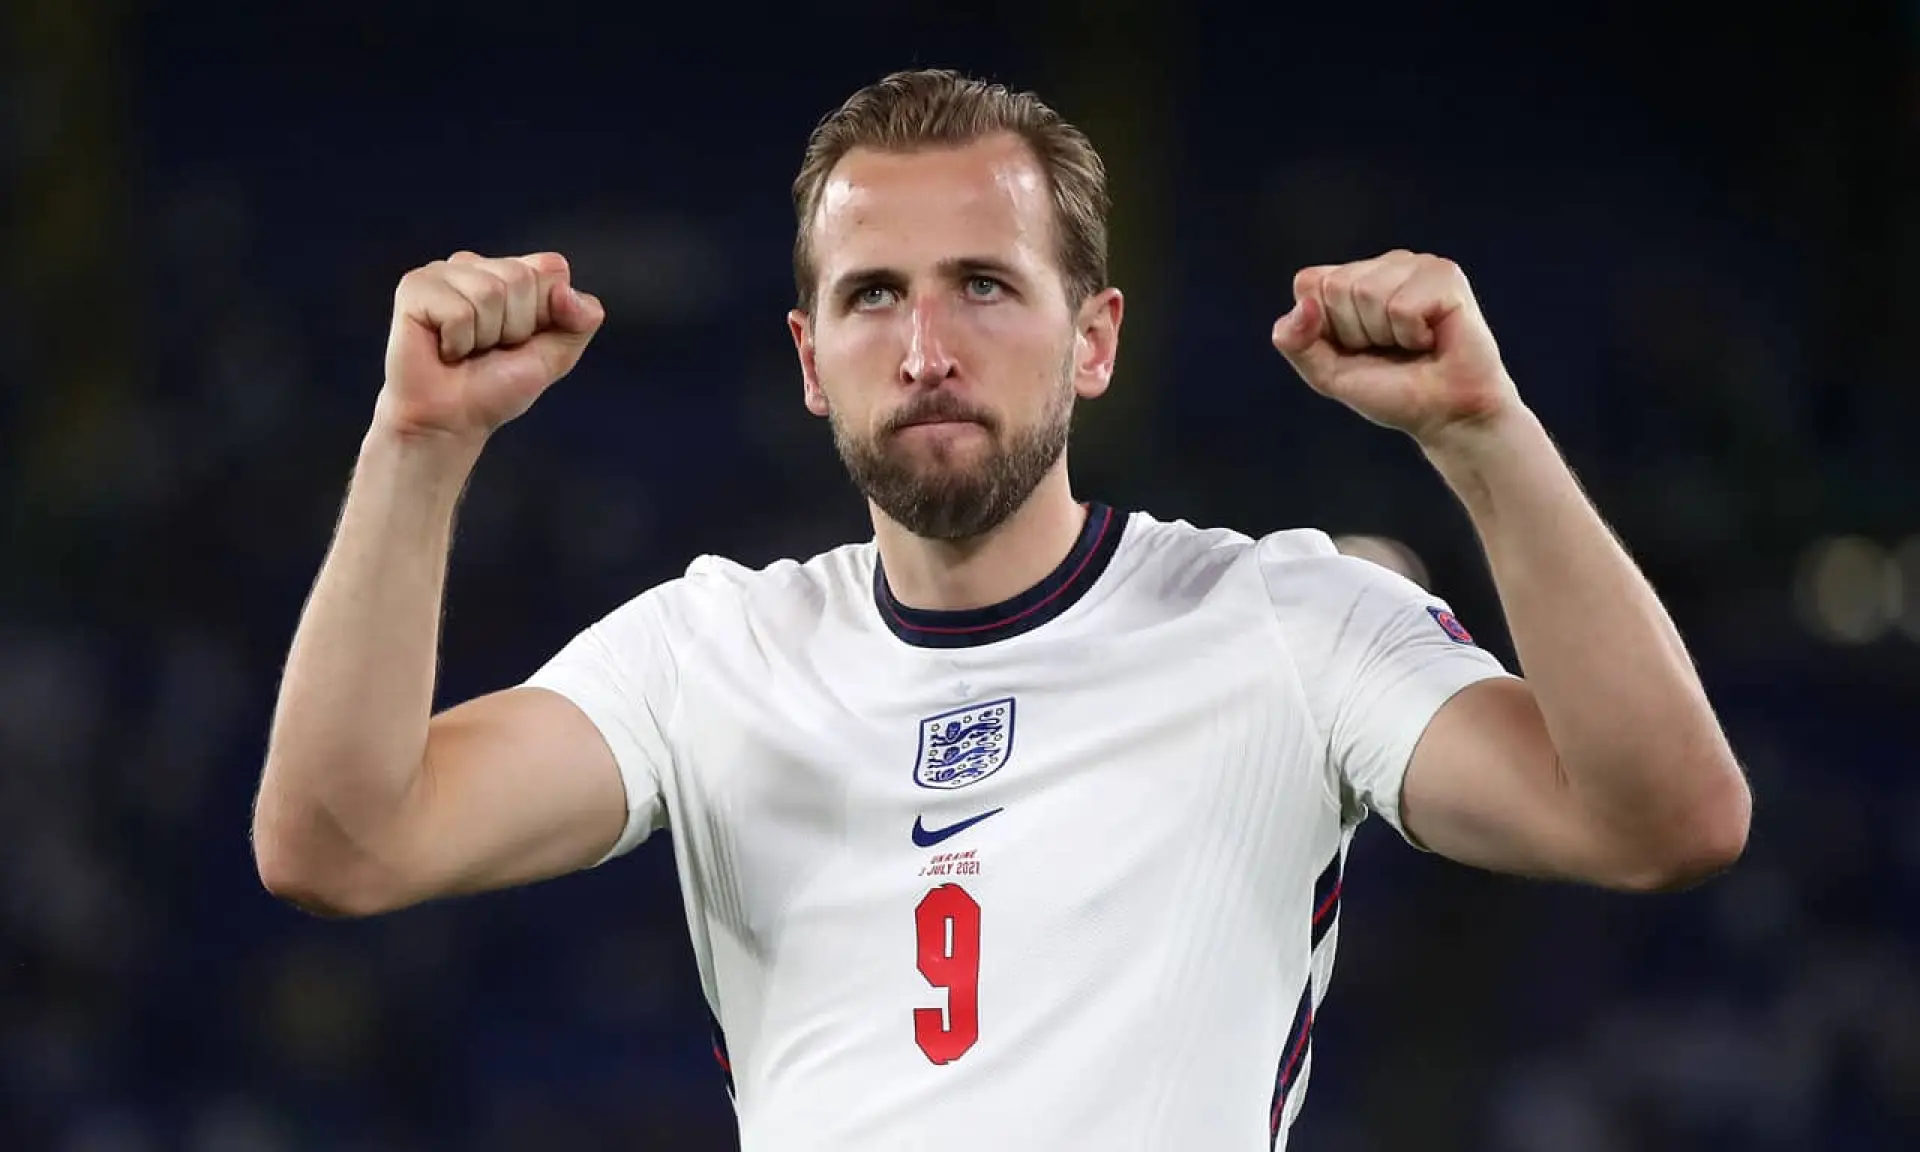 Harry Kane is now a leading contender in Euro 2020 top goalscorer tips